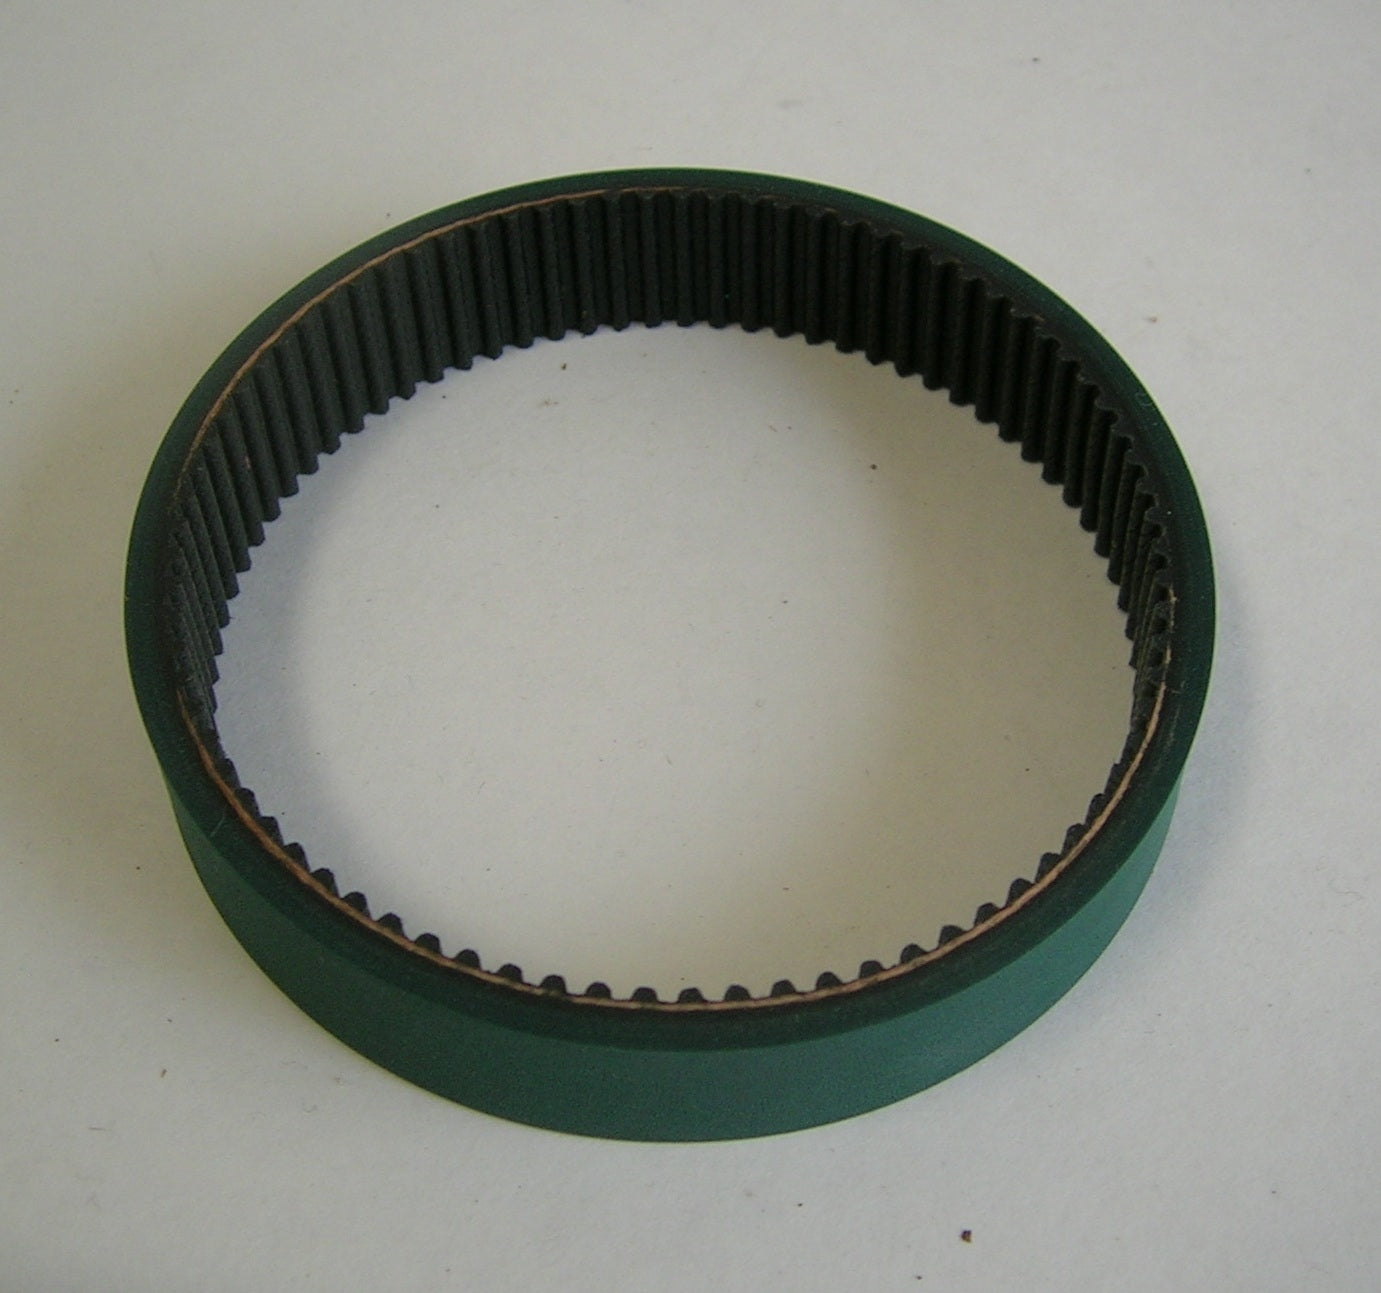 Toothed Replacement Grabber Feed Belt for Schleuniger MultiStrip 9480 Green